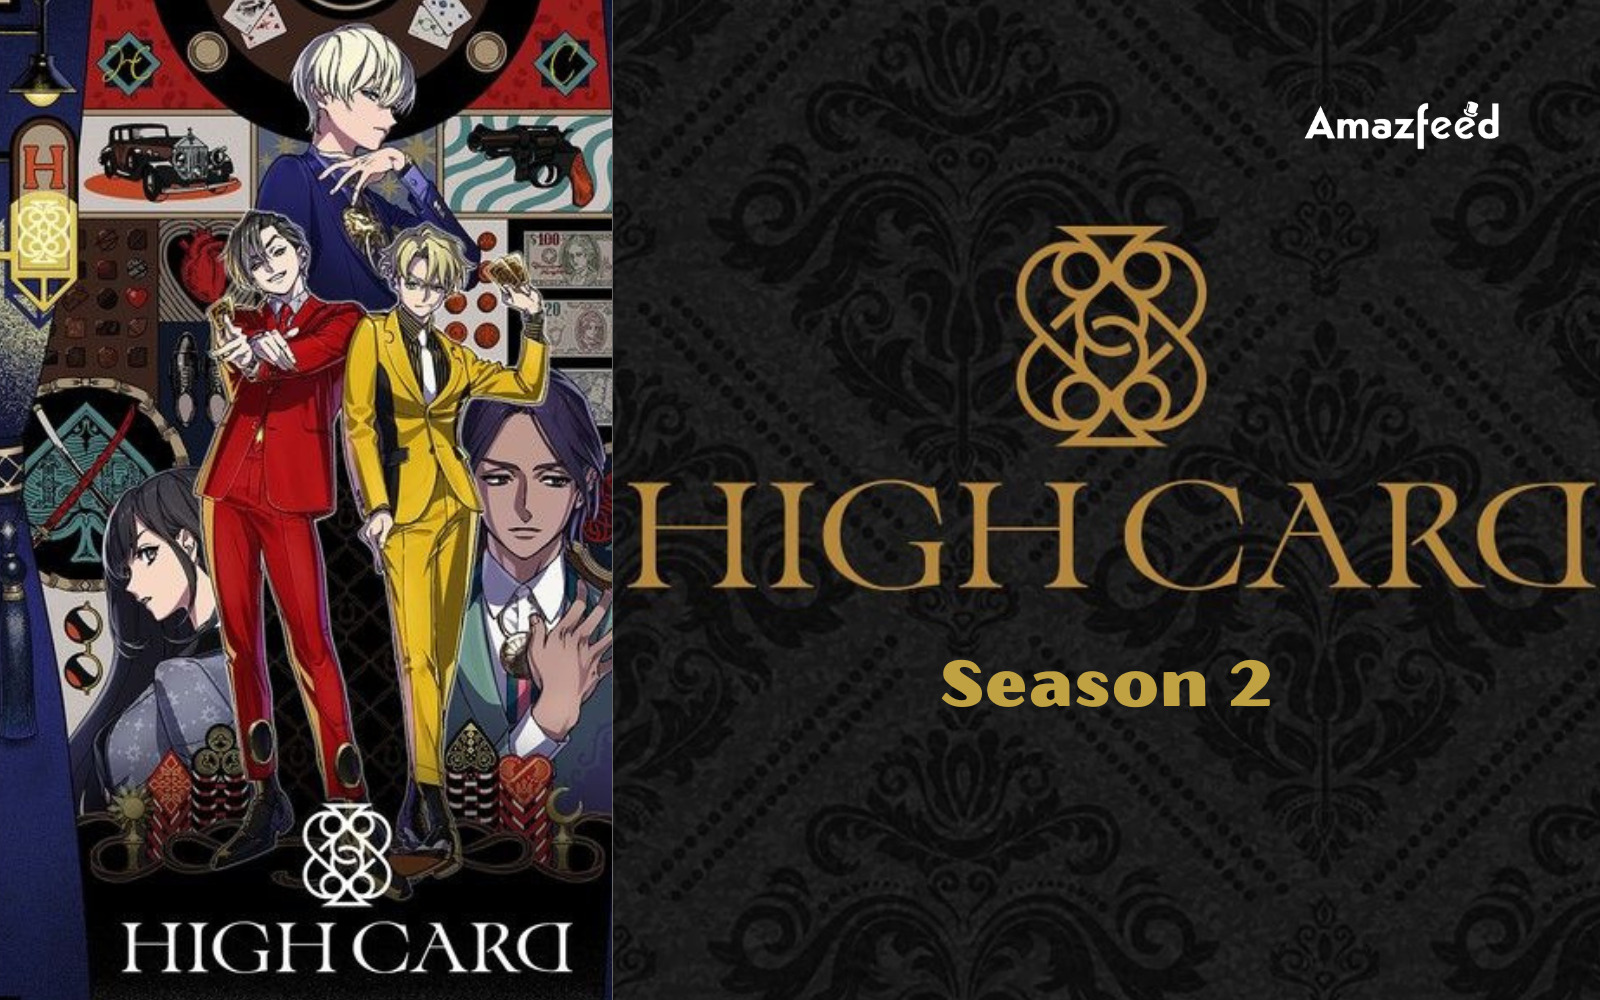 High Card season 2 release window, trailer, plot, cast, and more